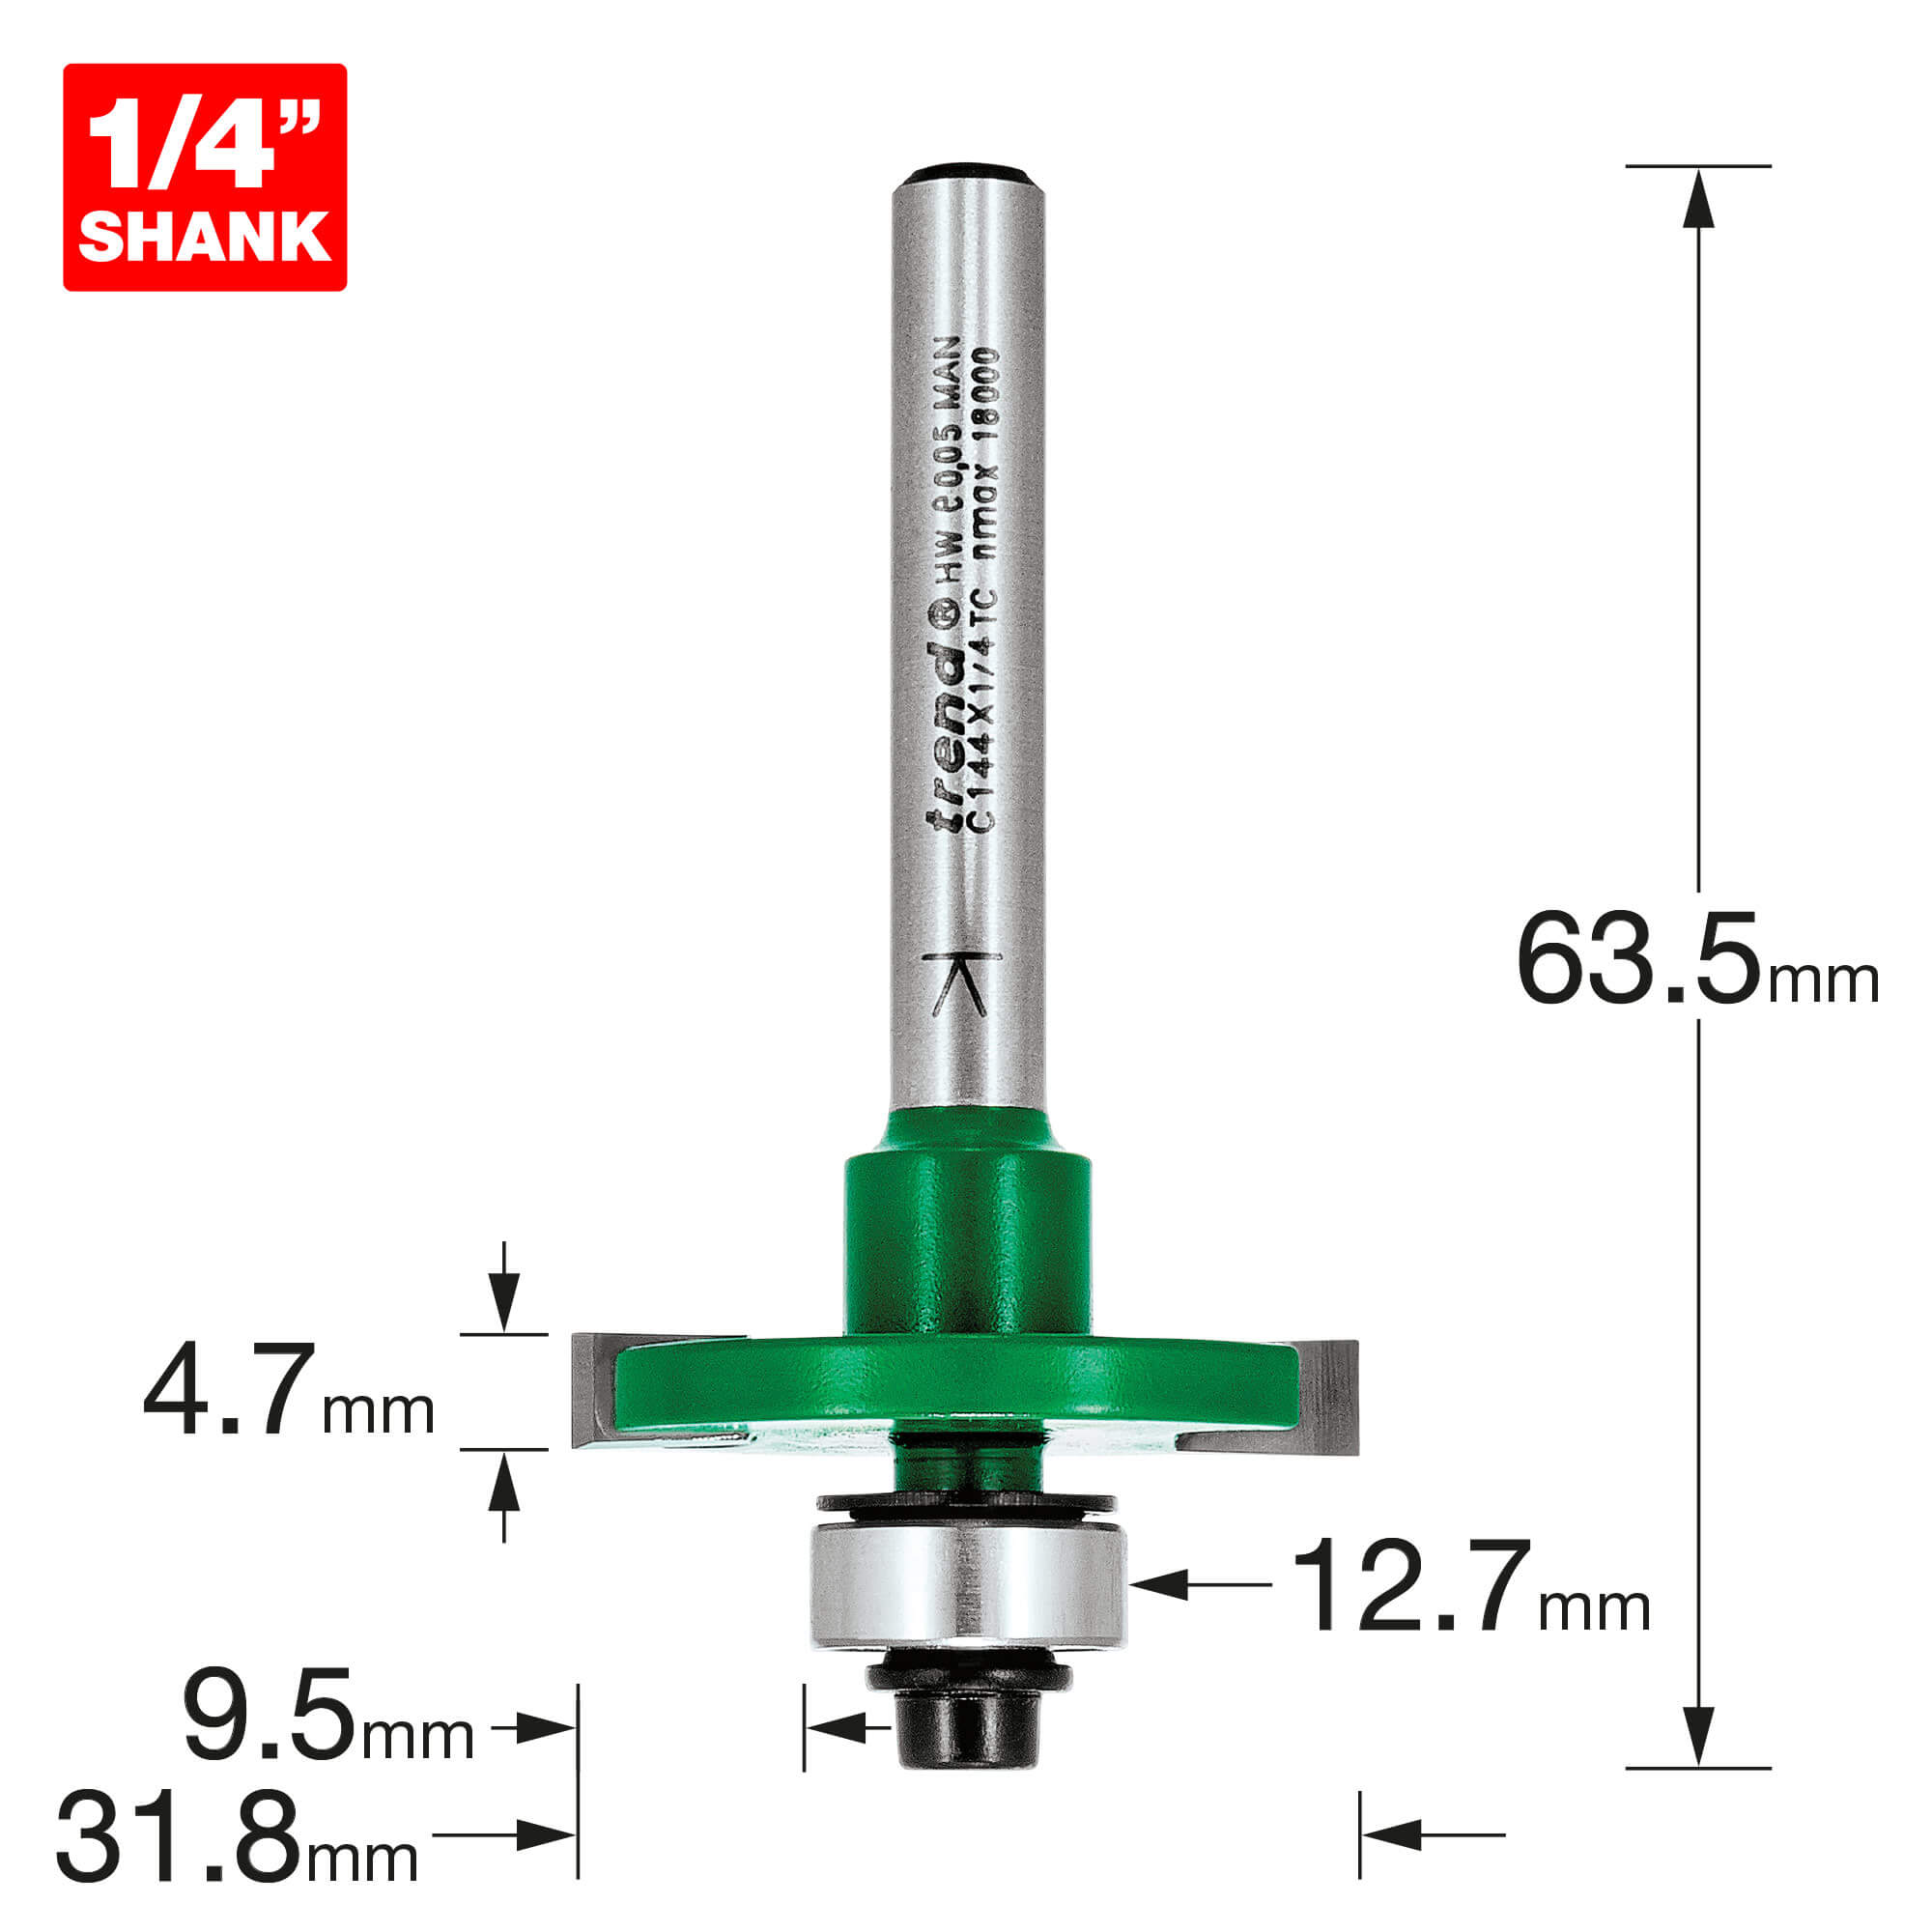 Image of Trend CRAFTPRO One Piece Slotting Router Cutter 4.7mm 31.8mm 1/4"